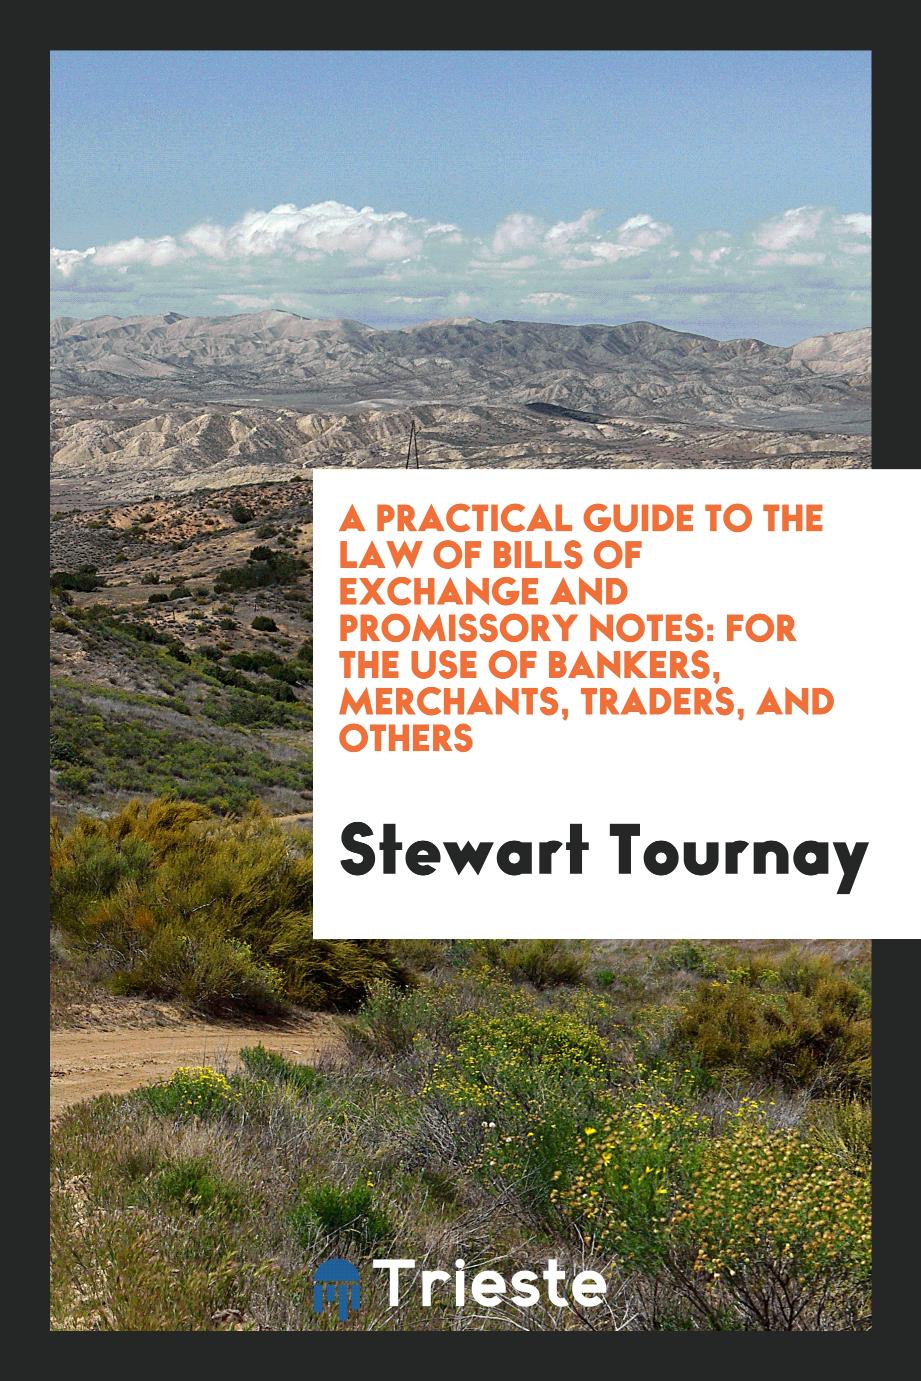 A Practical Guide to the Law of Bills of Exchange and Promissory Notes: For the Use of Bankers, Merchants, Traders, and Others